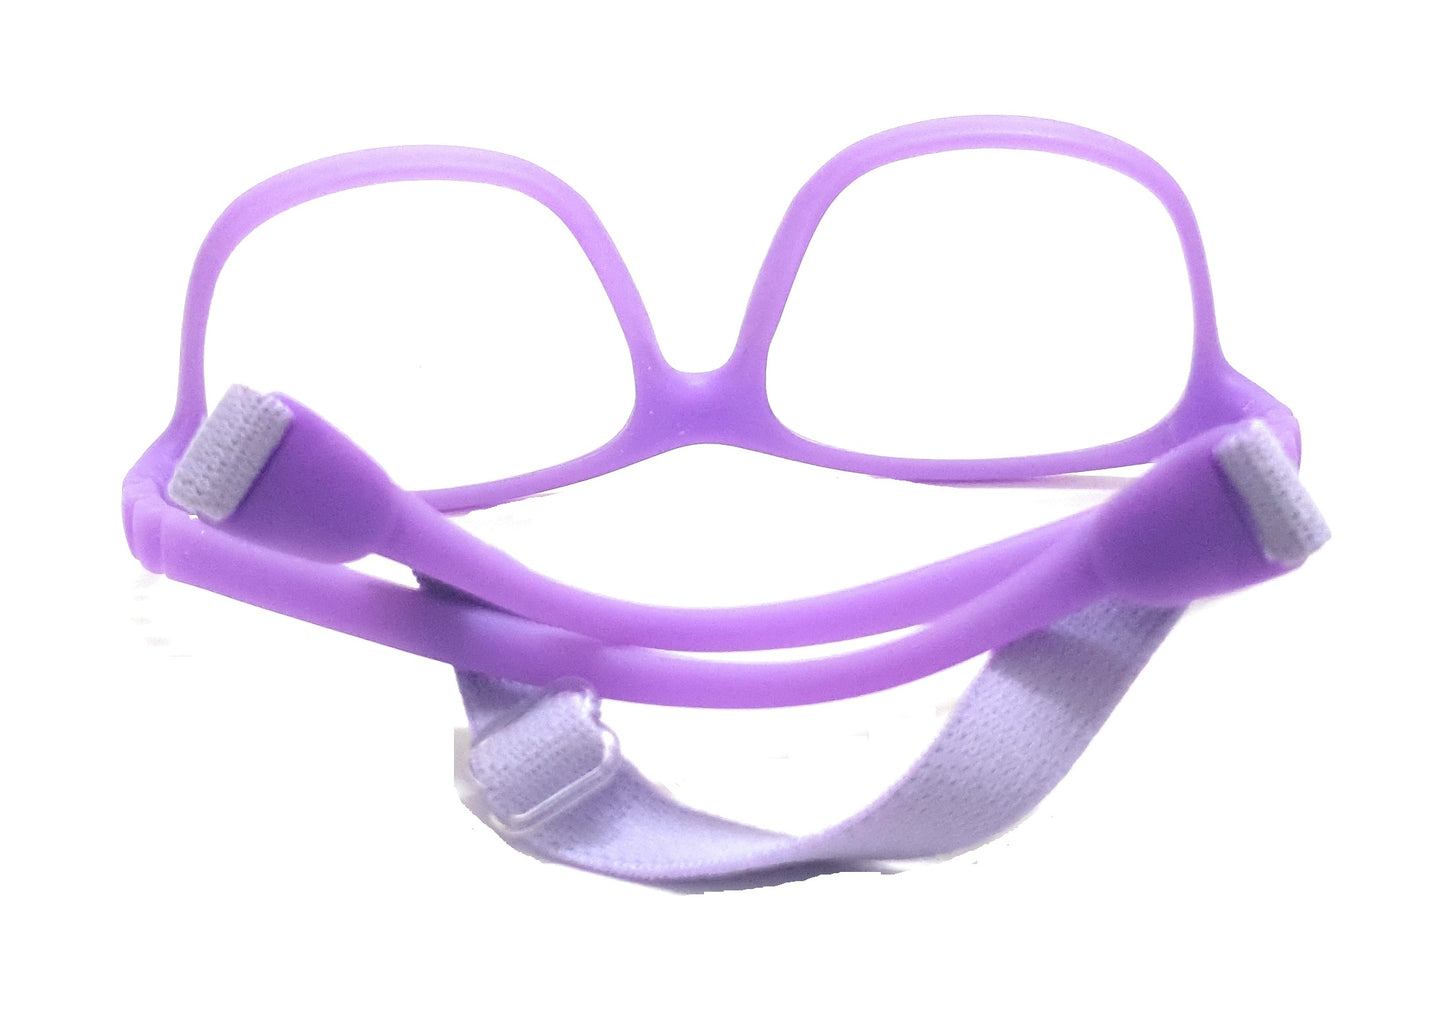 Affaires Blue Ray Block glasses Frames for Kids, Flexible, Bendable, No Screws, Glasses with anti-reflection | BC-283 (Purple)